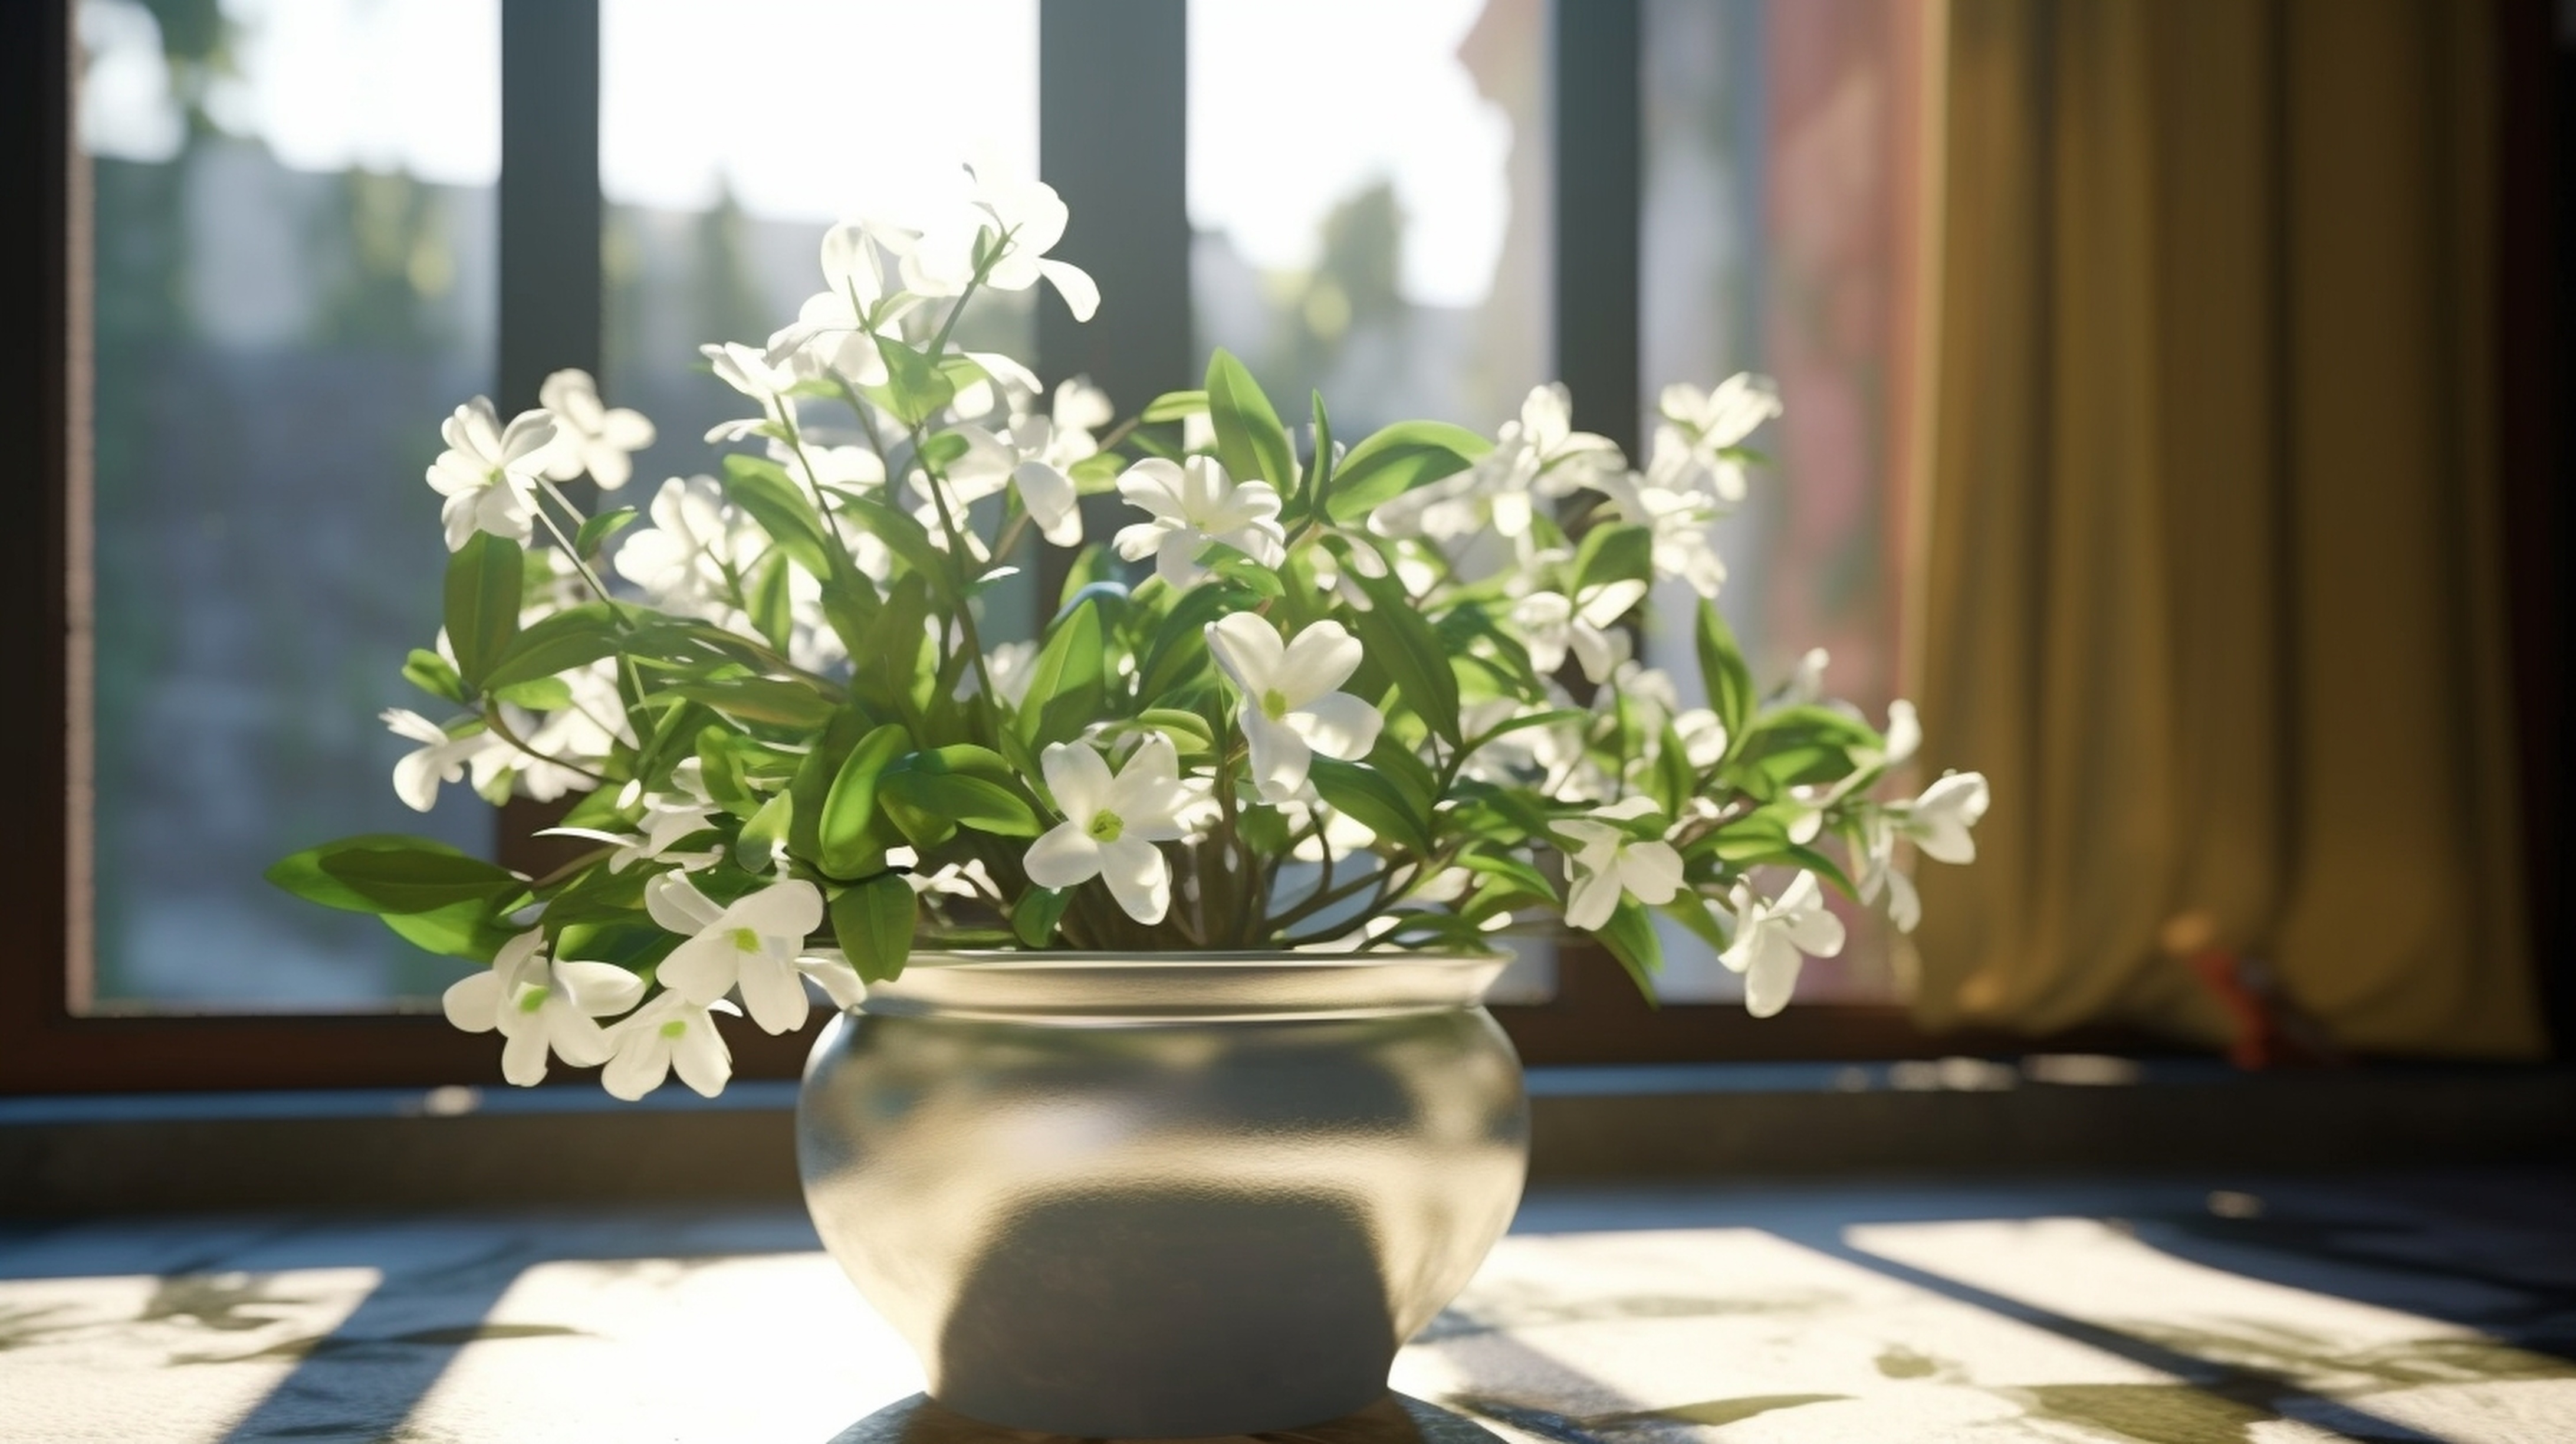 Jasmine Plant: Fragrant blooms for a tranquil bedroom; a natural touch of relaxation.